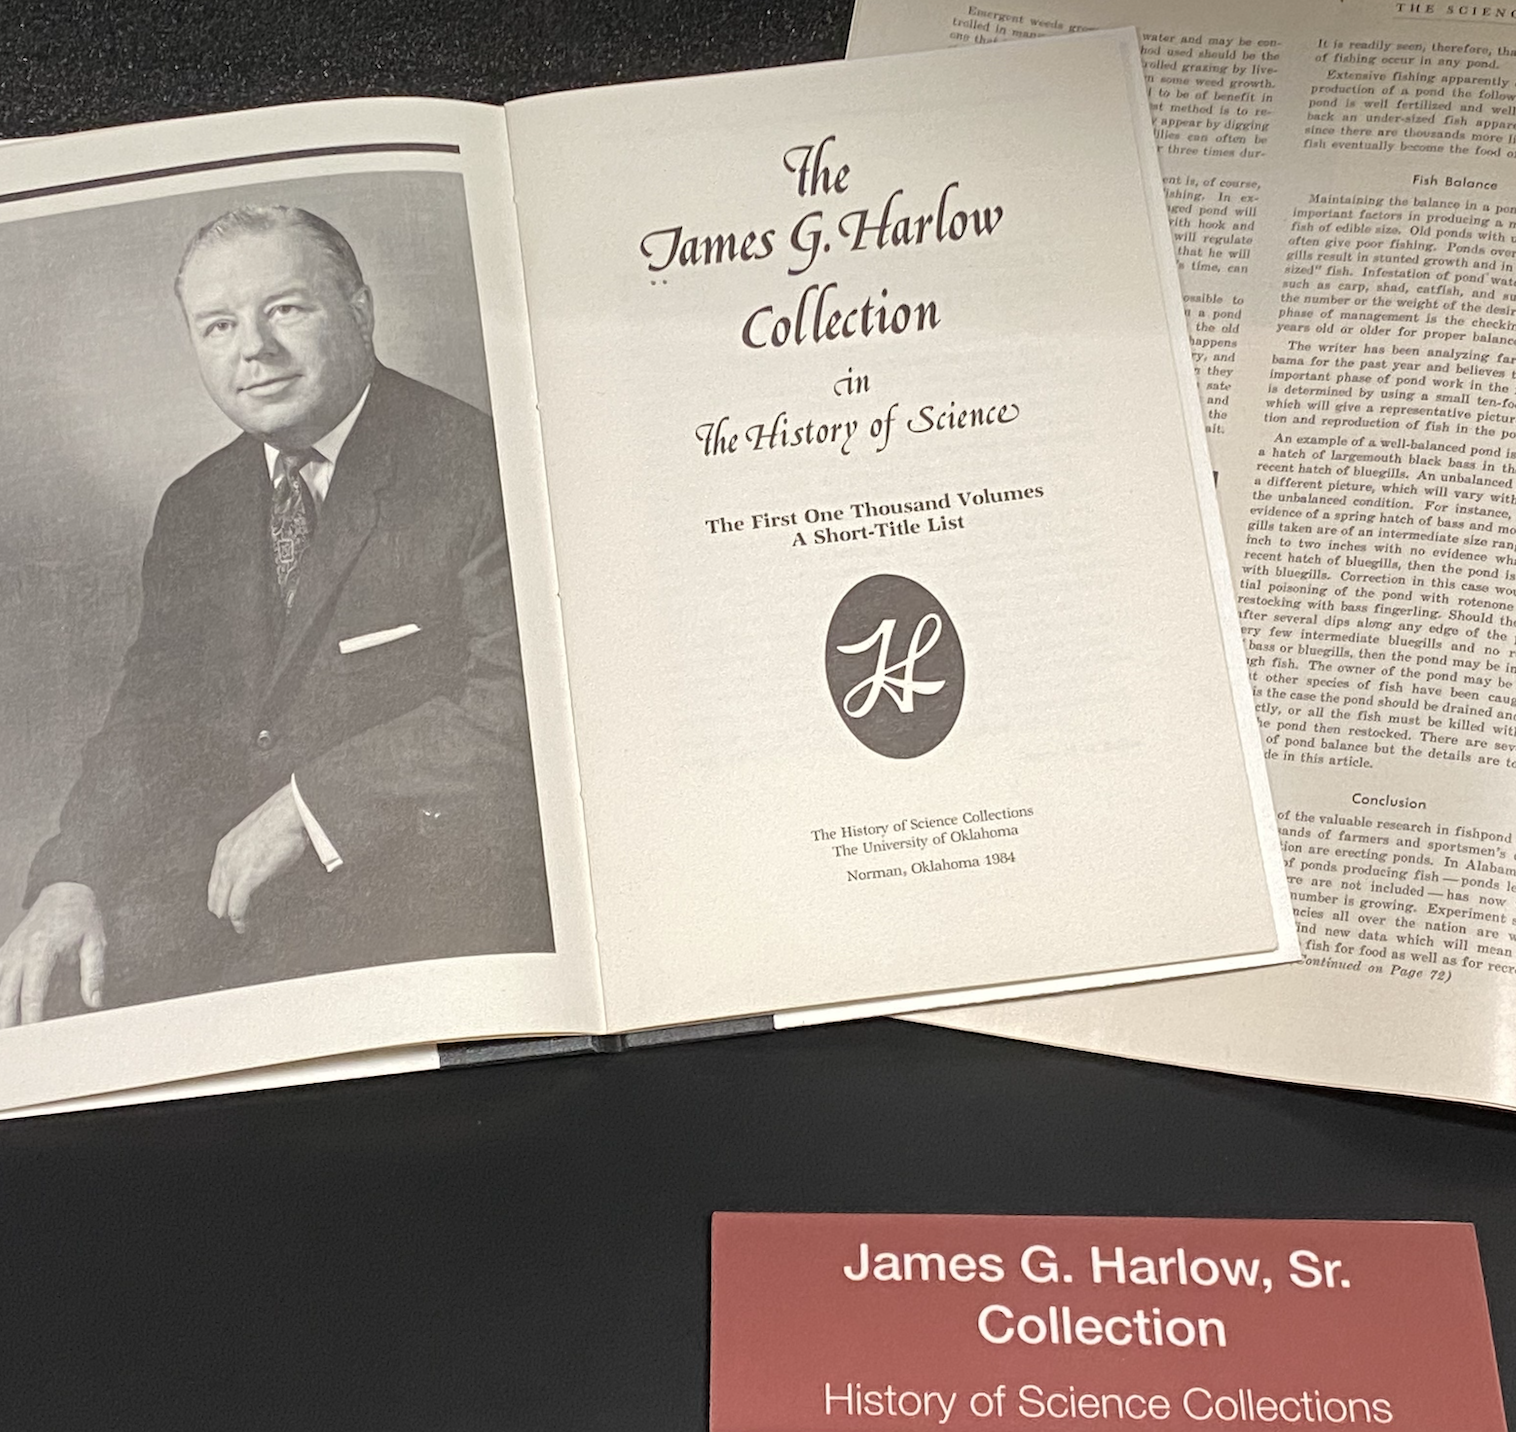 Photo of collection catalog opened to photograph of James G. Harlow, Sr.